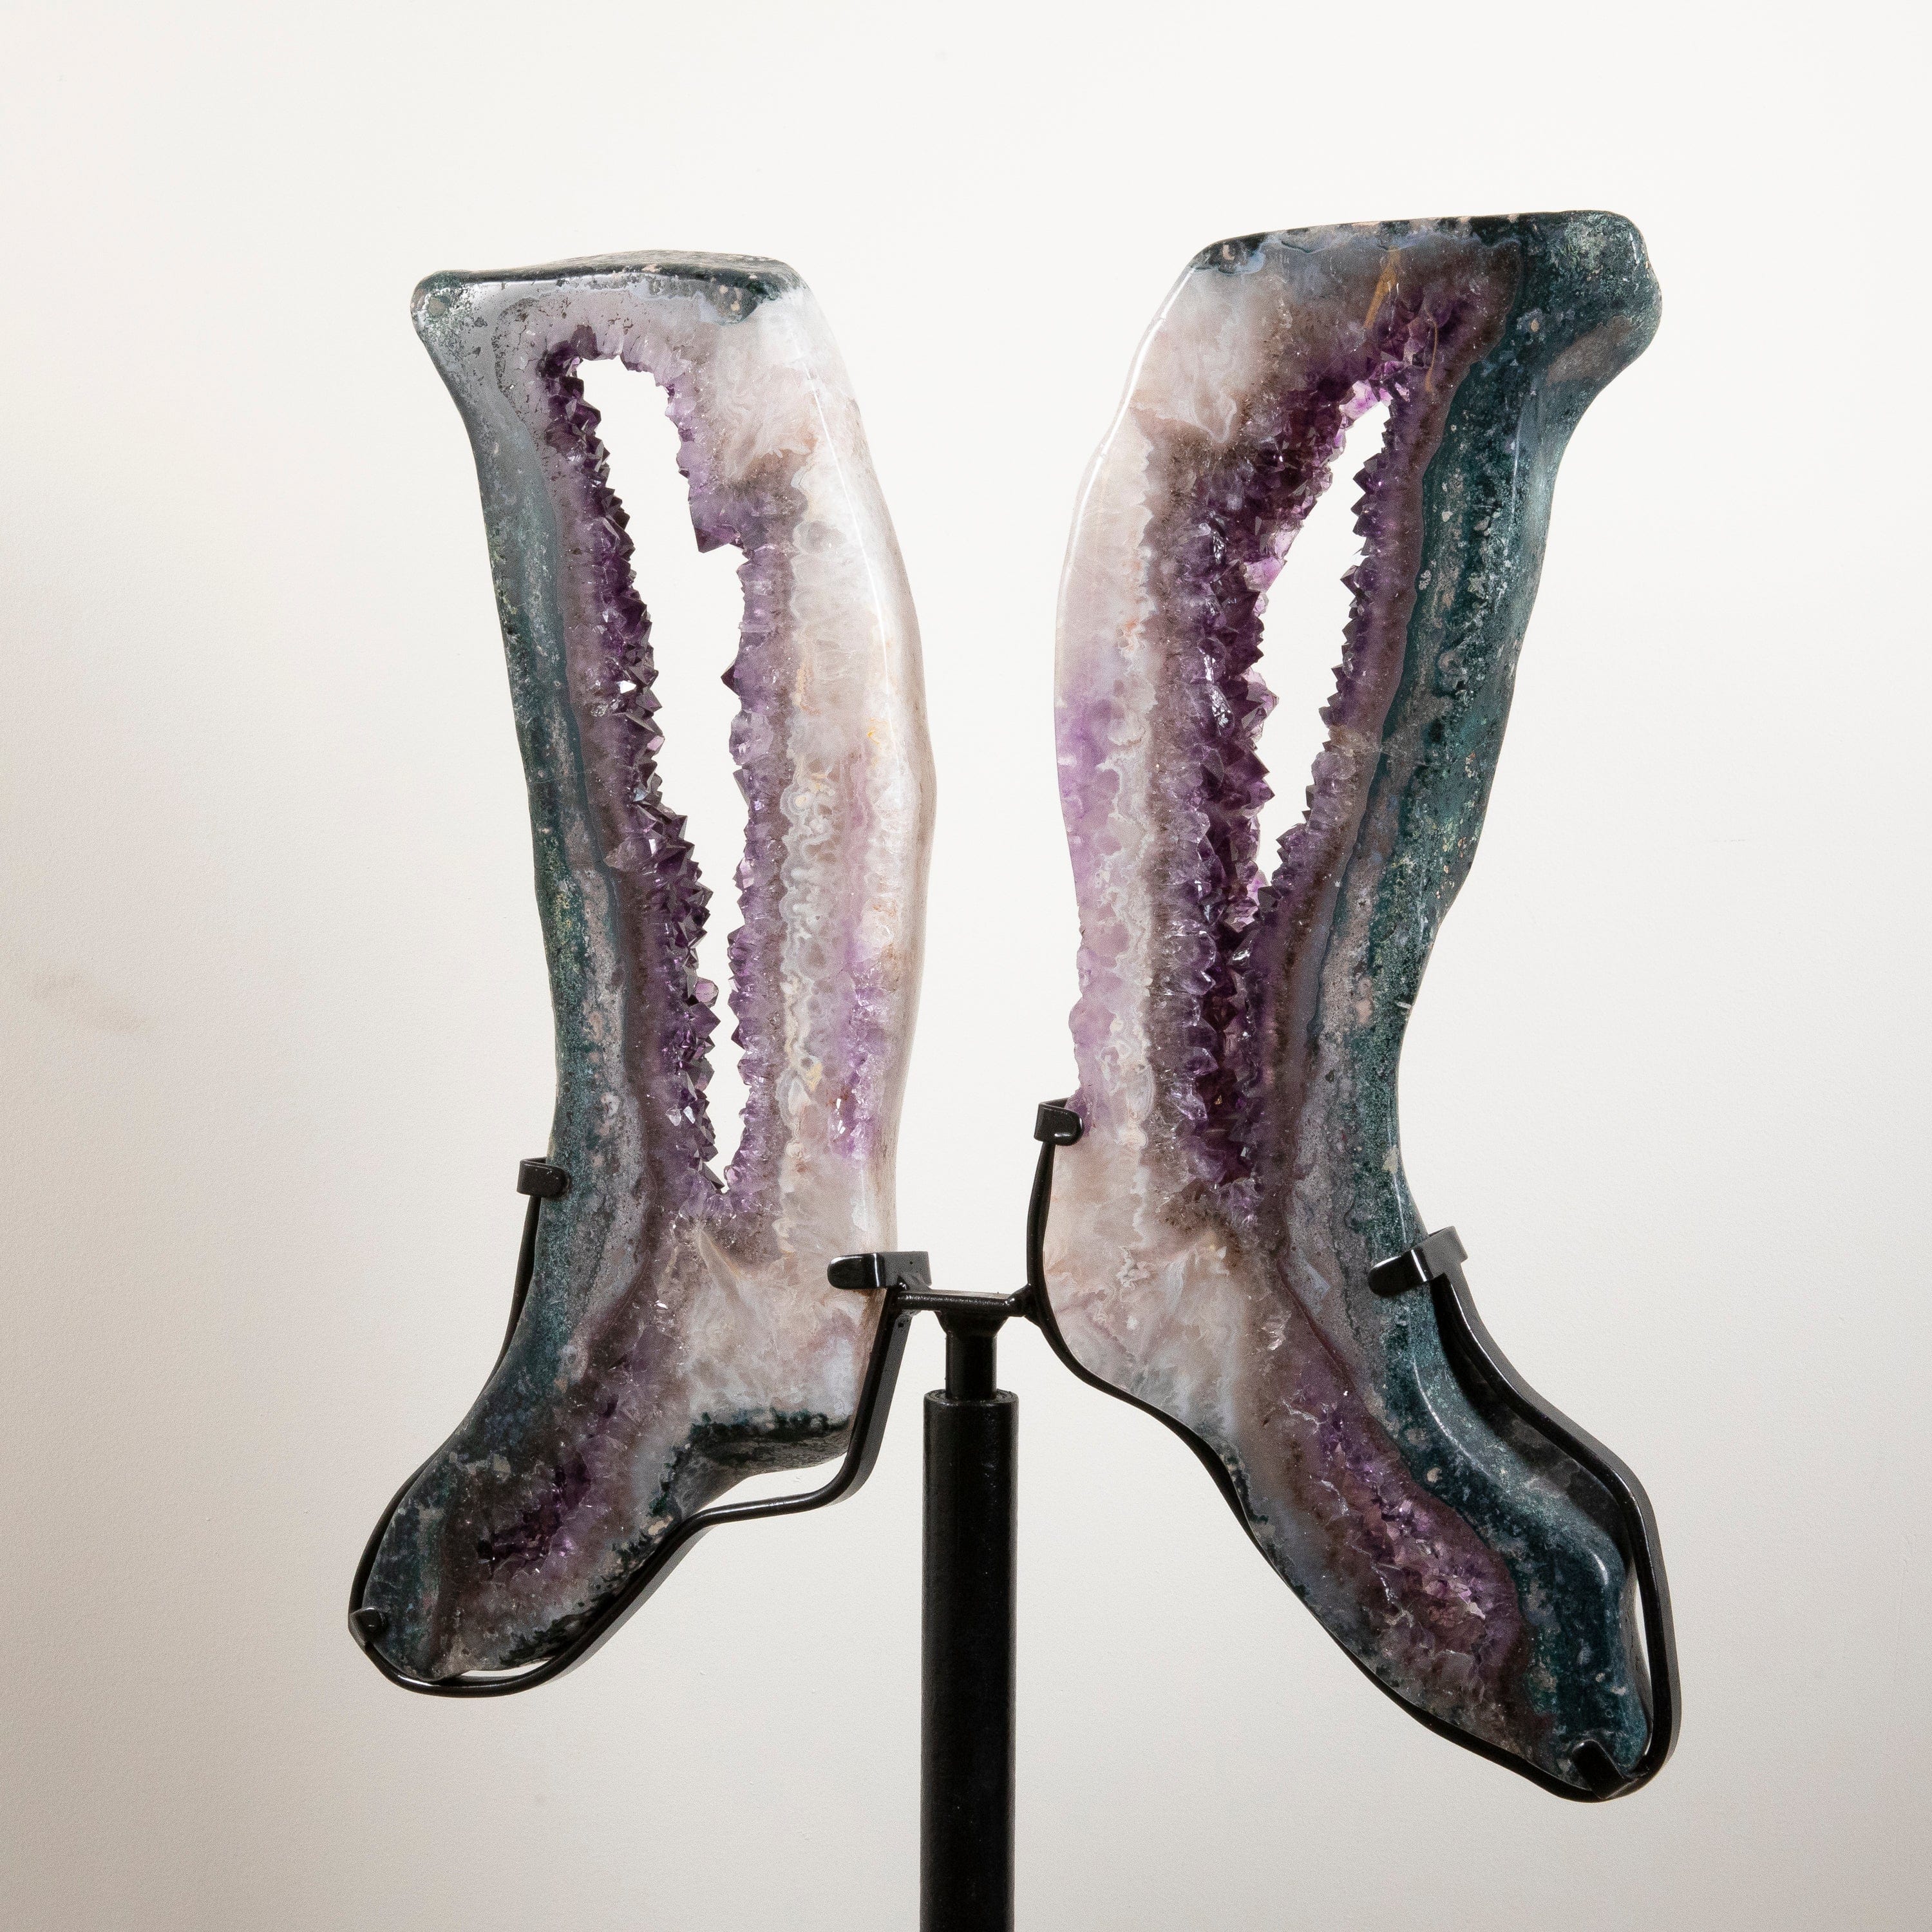 Kalifano Amethyst Amethyst Geode Wings from Brazil on Custom Stand- 38" / 42 lbs BAG8000.007